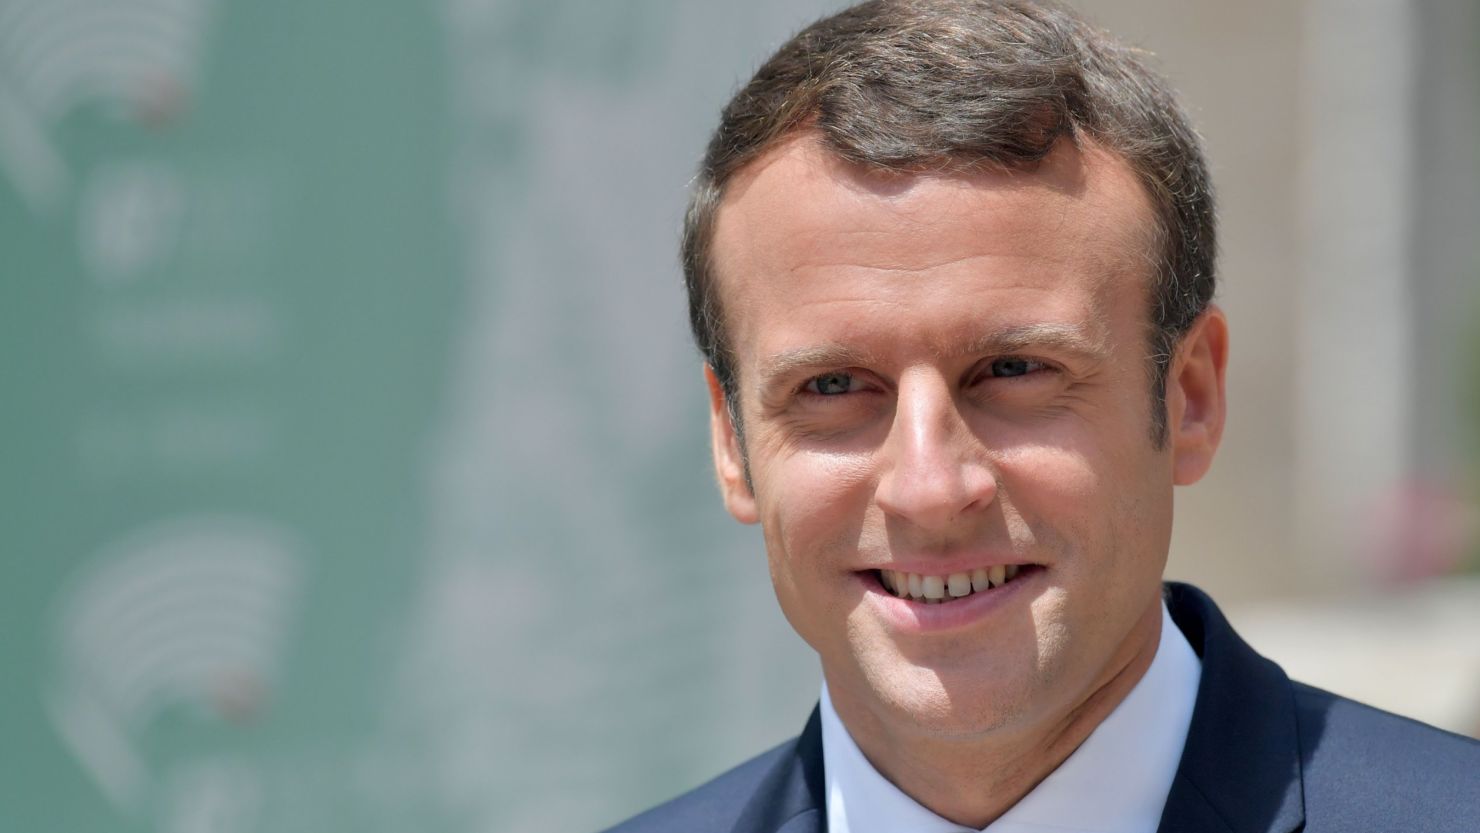 Macron's party En Marche! is aiming to secure a majority in next month's legislative elections.